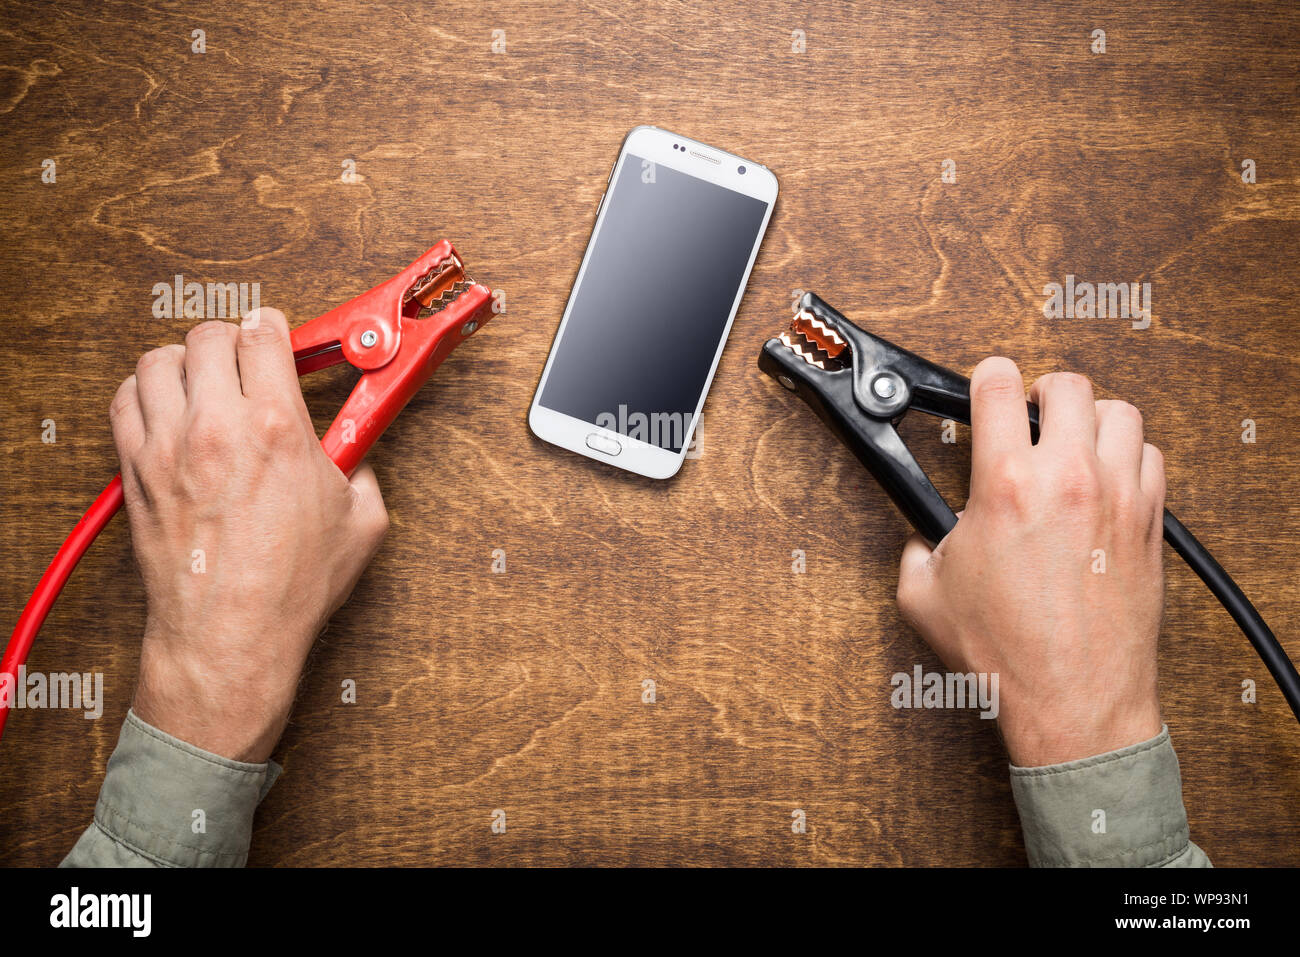 Hands holding charching clamps near smartphone with dead battery. Phone charging, energy efficiency concept. Stock Photo